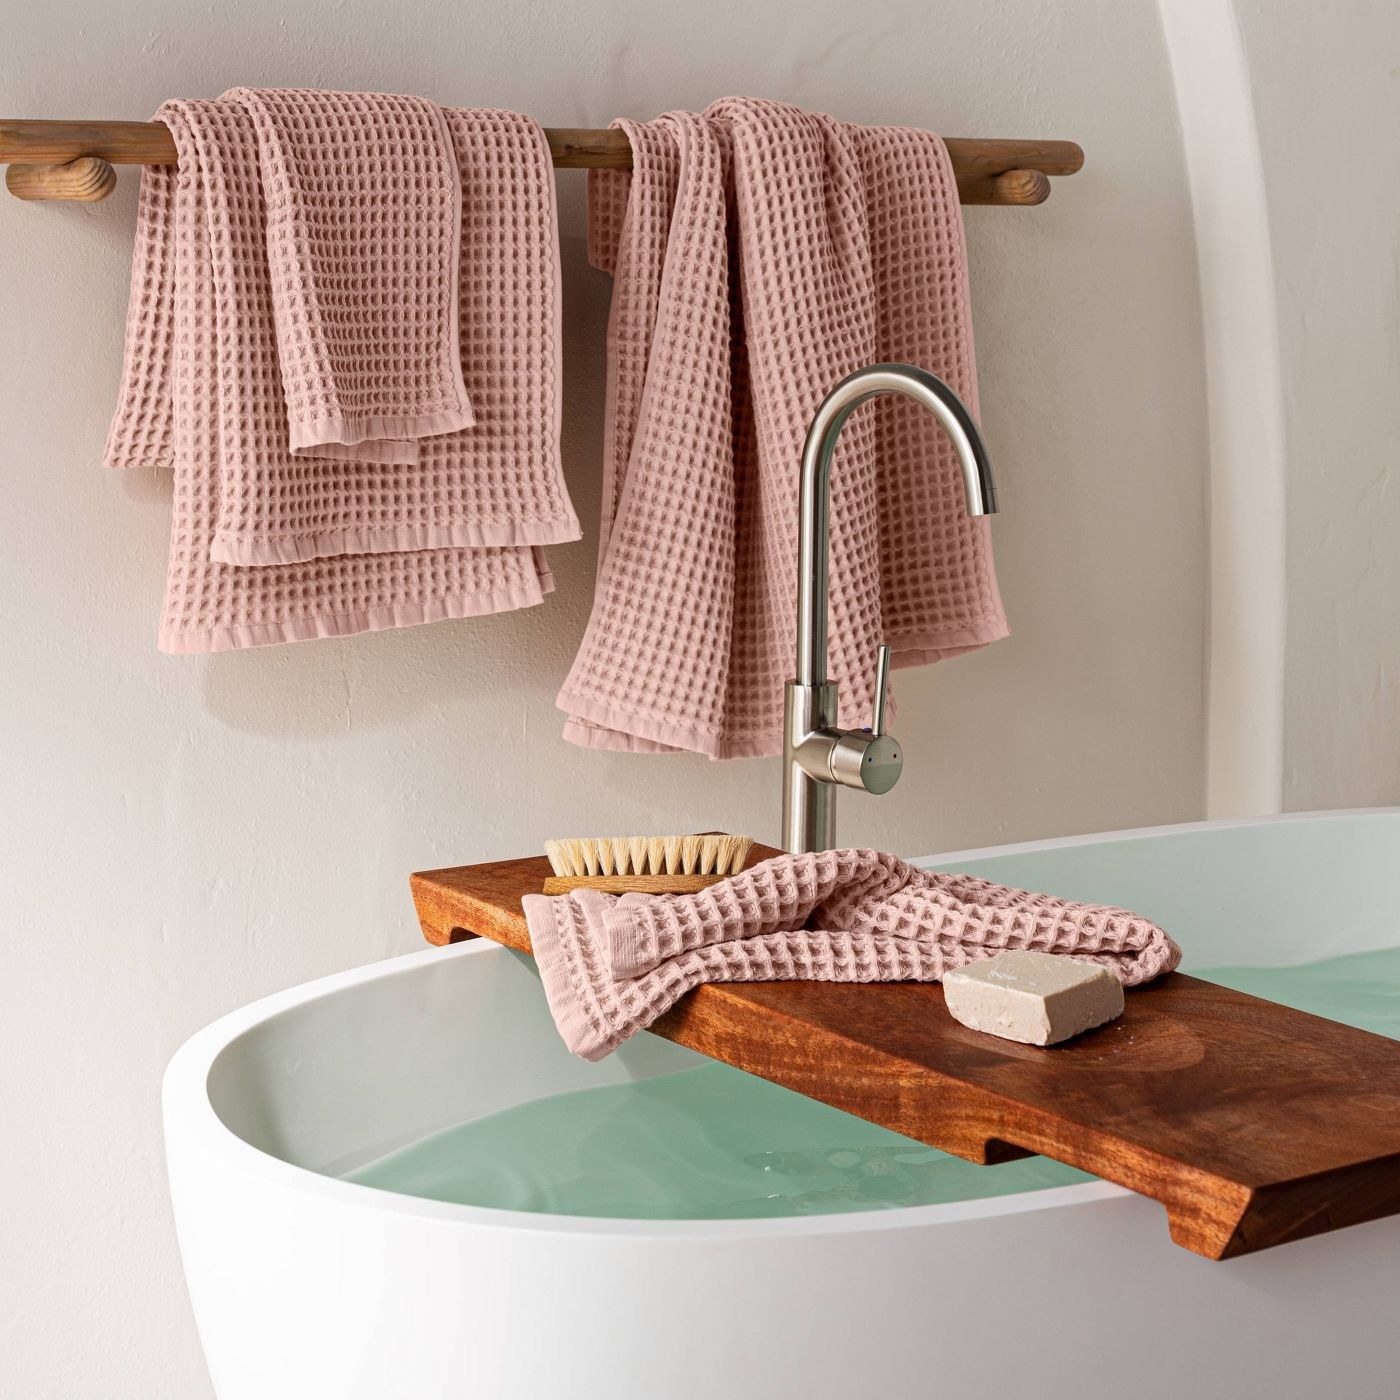 A deep bath filled with water with pink waffle towels draped over a wooden caddy